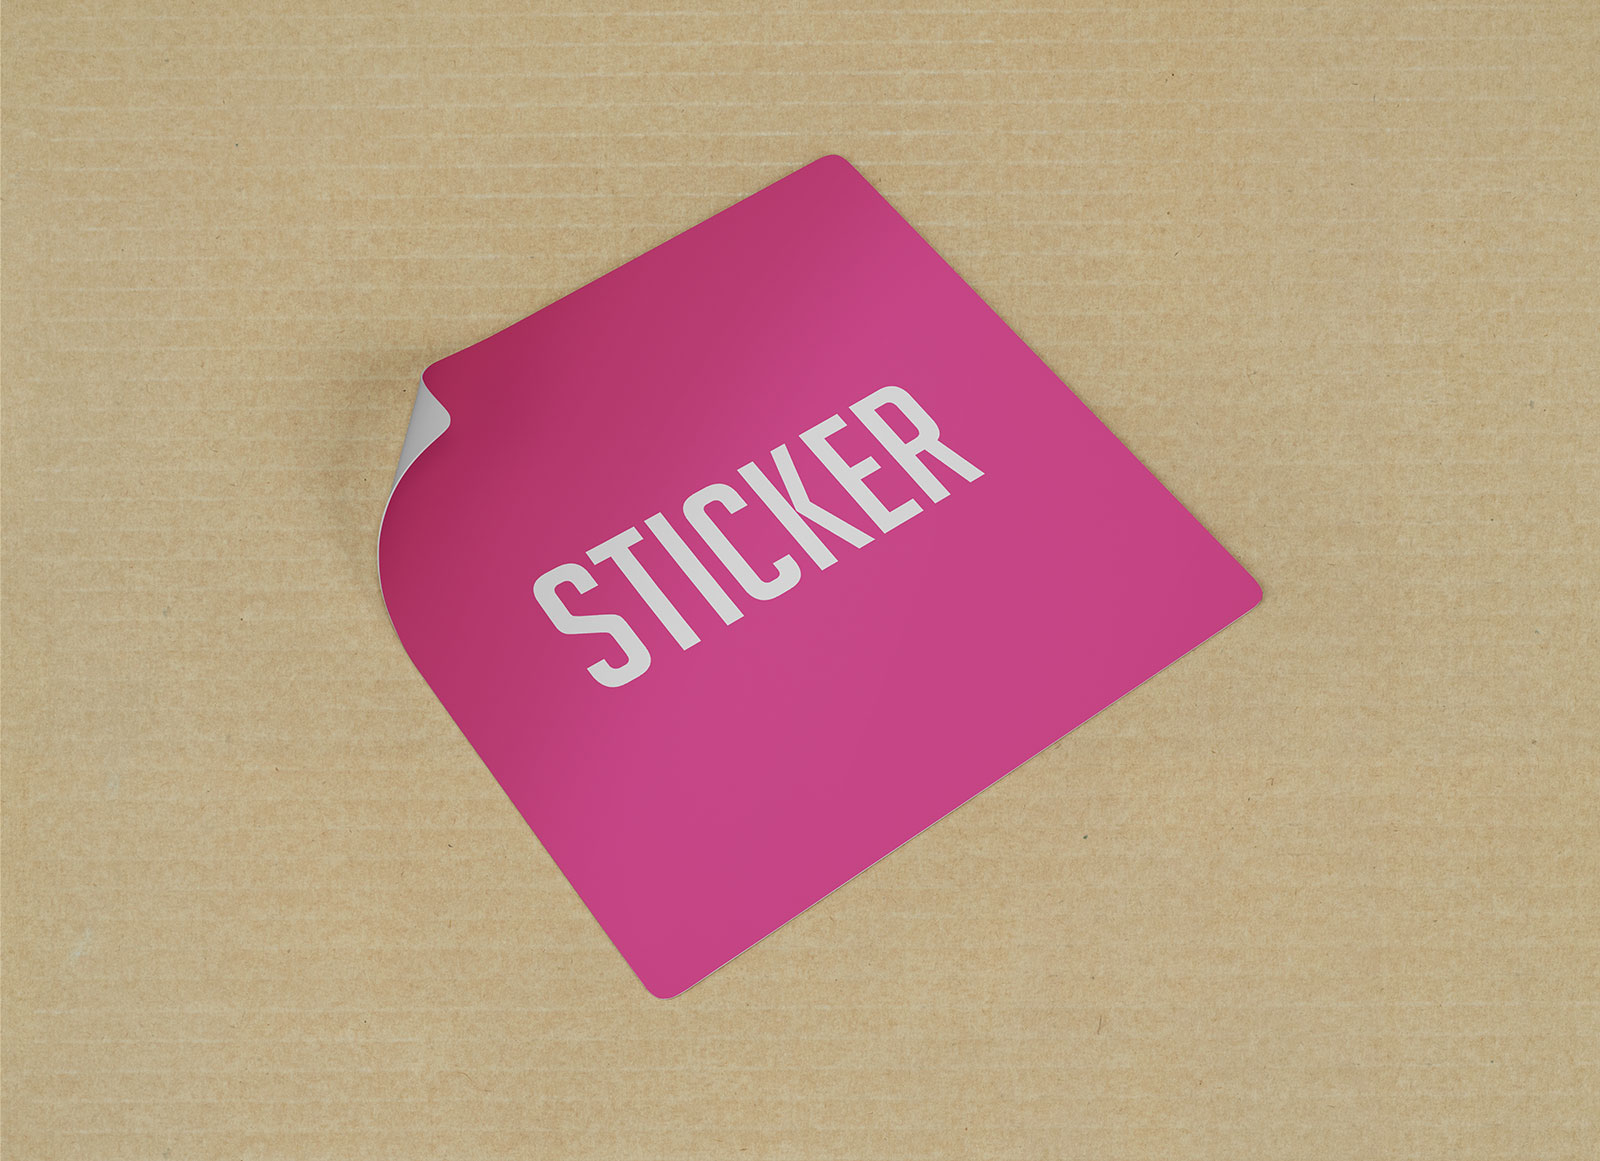 Free Rounded Square Sticker Mockup PSD Set